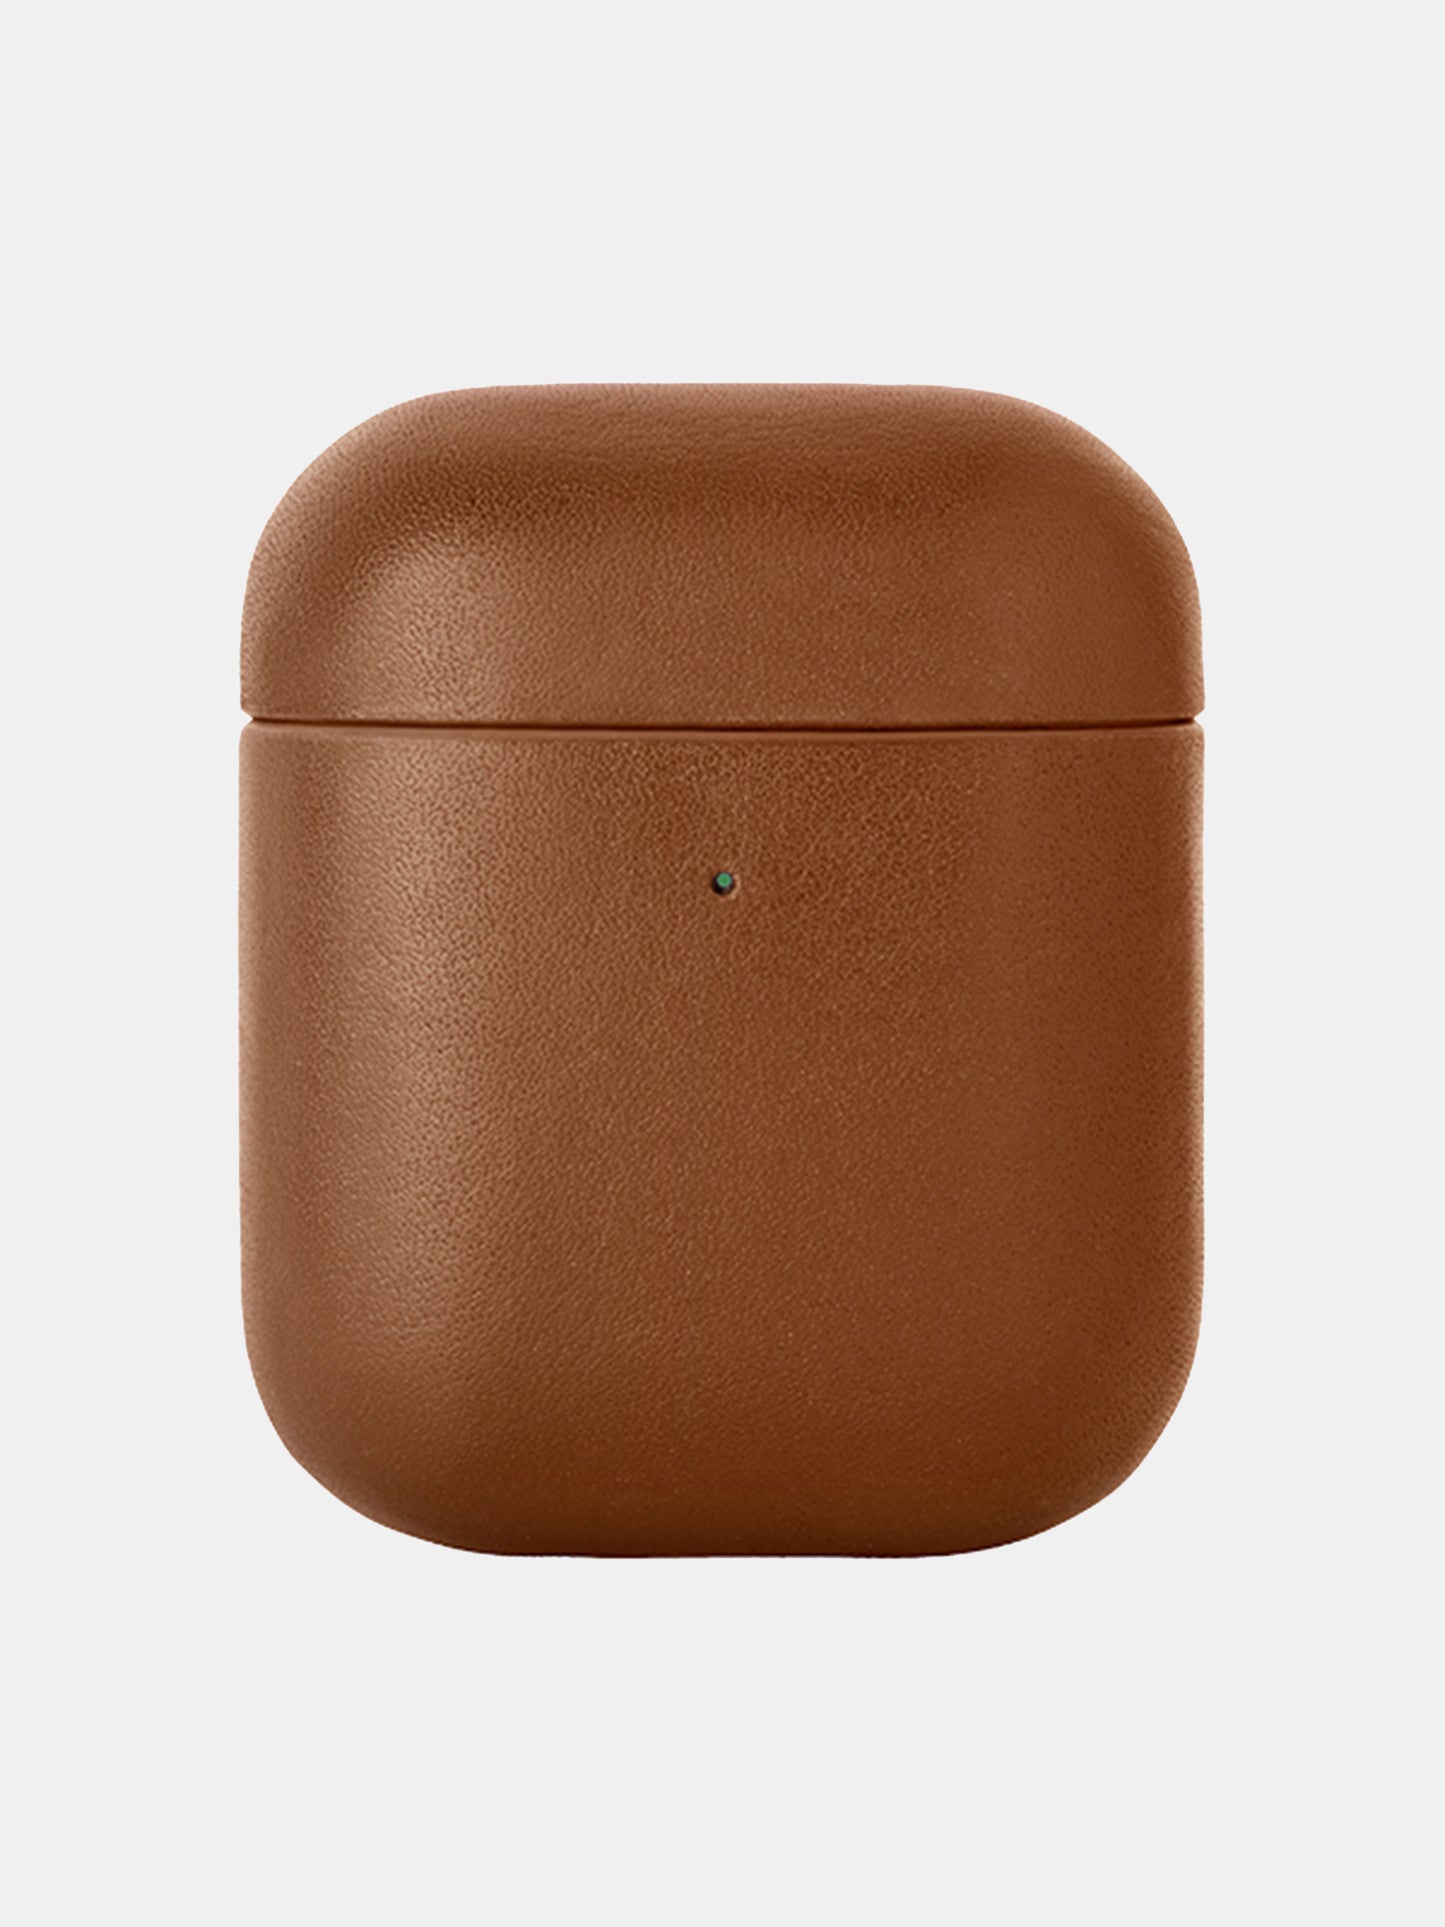 Native Union Tan Leather Case for AirPods